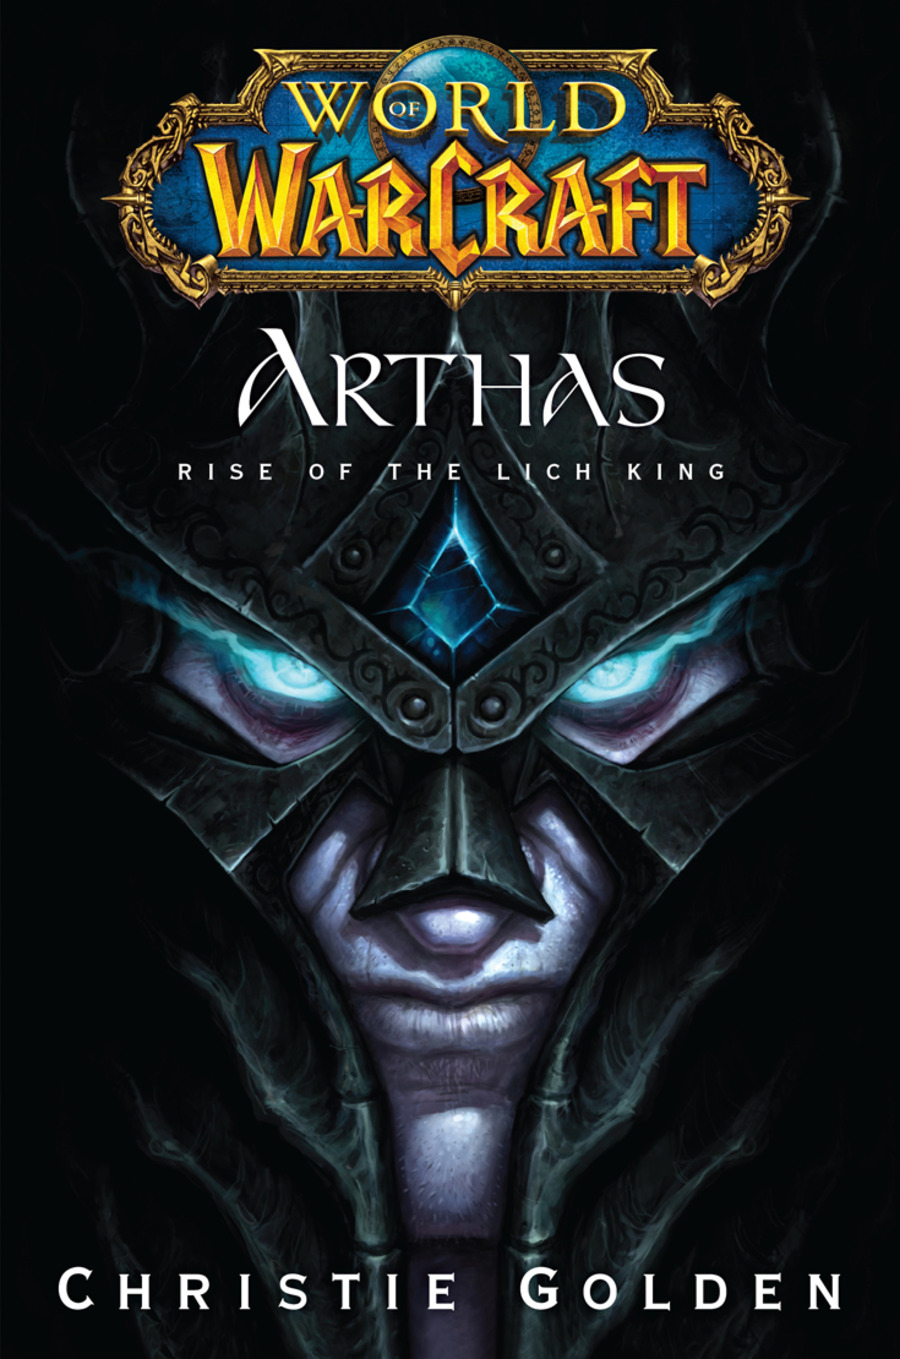 World-of-warcraft-arthas-rise-of-the-lich-king-1375452950297260